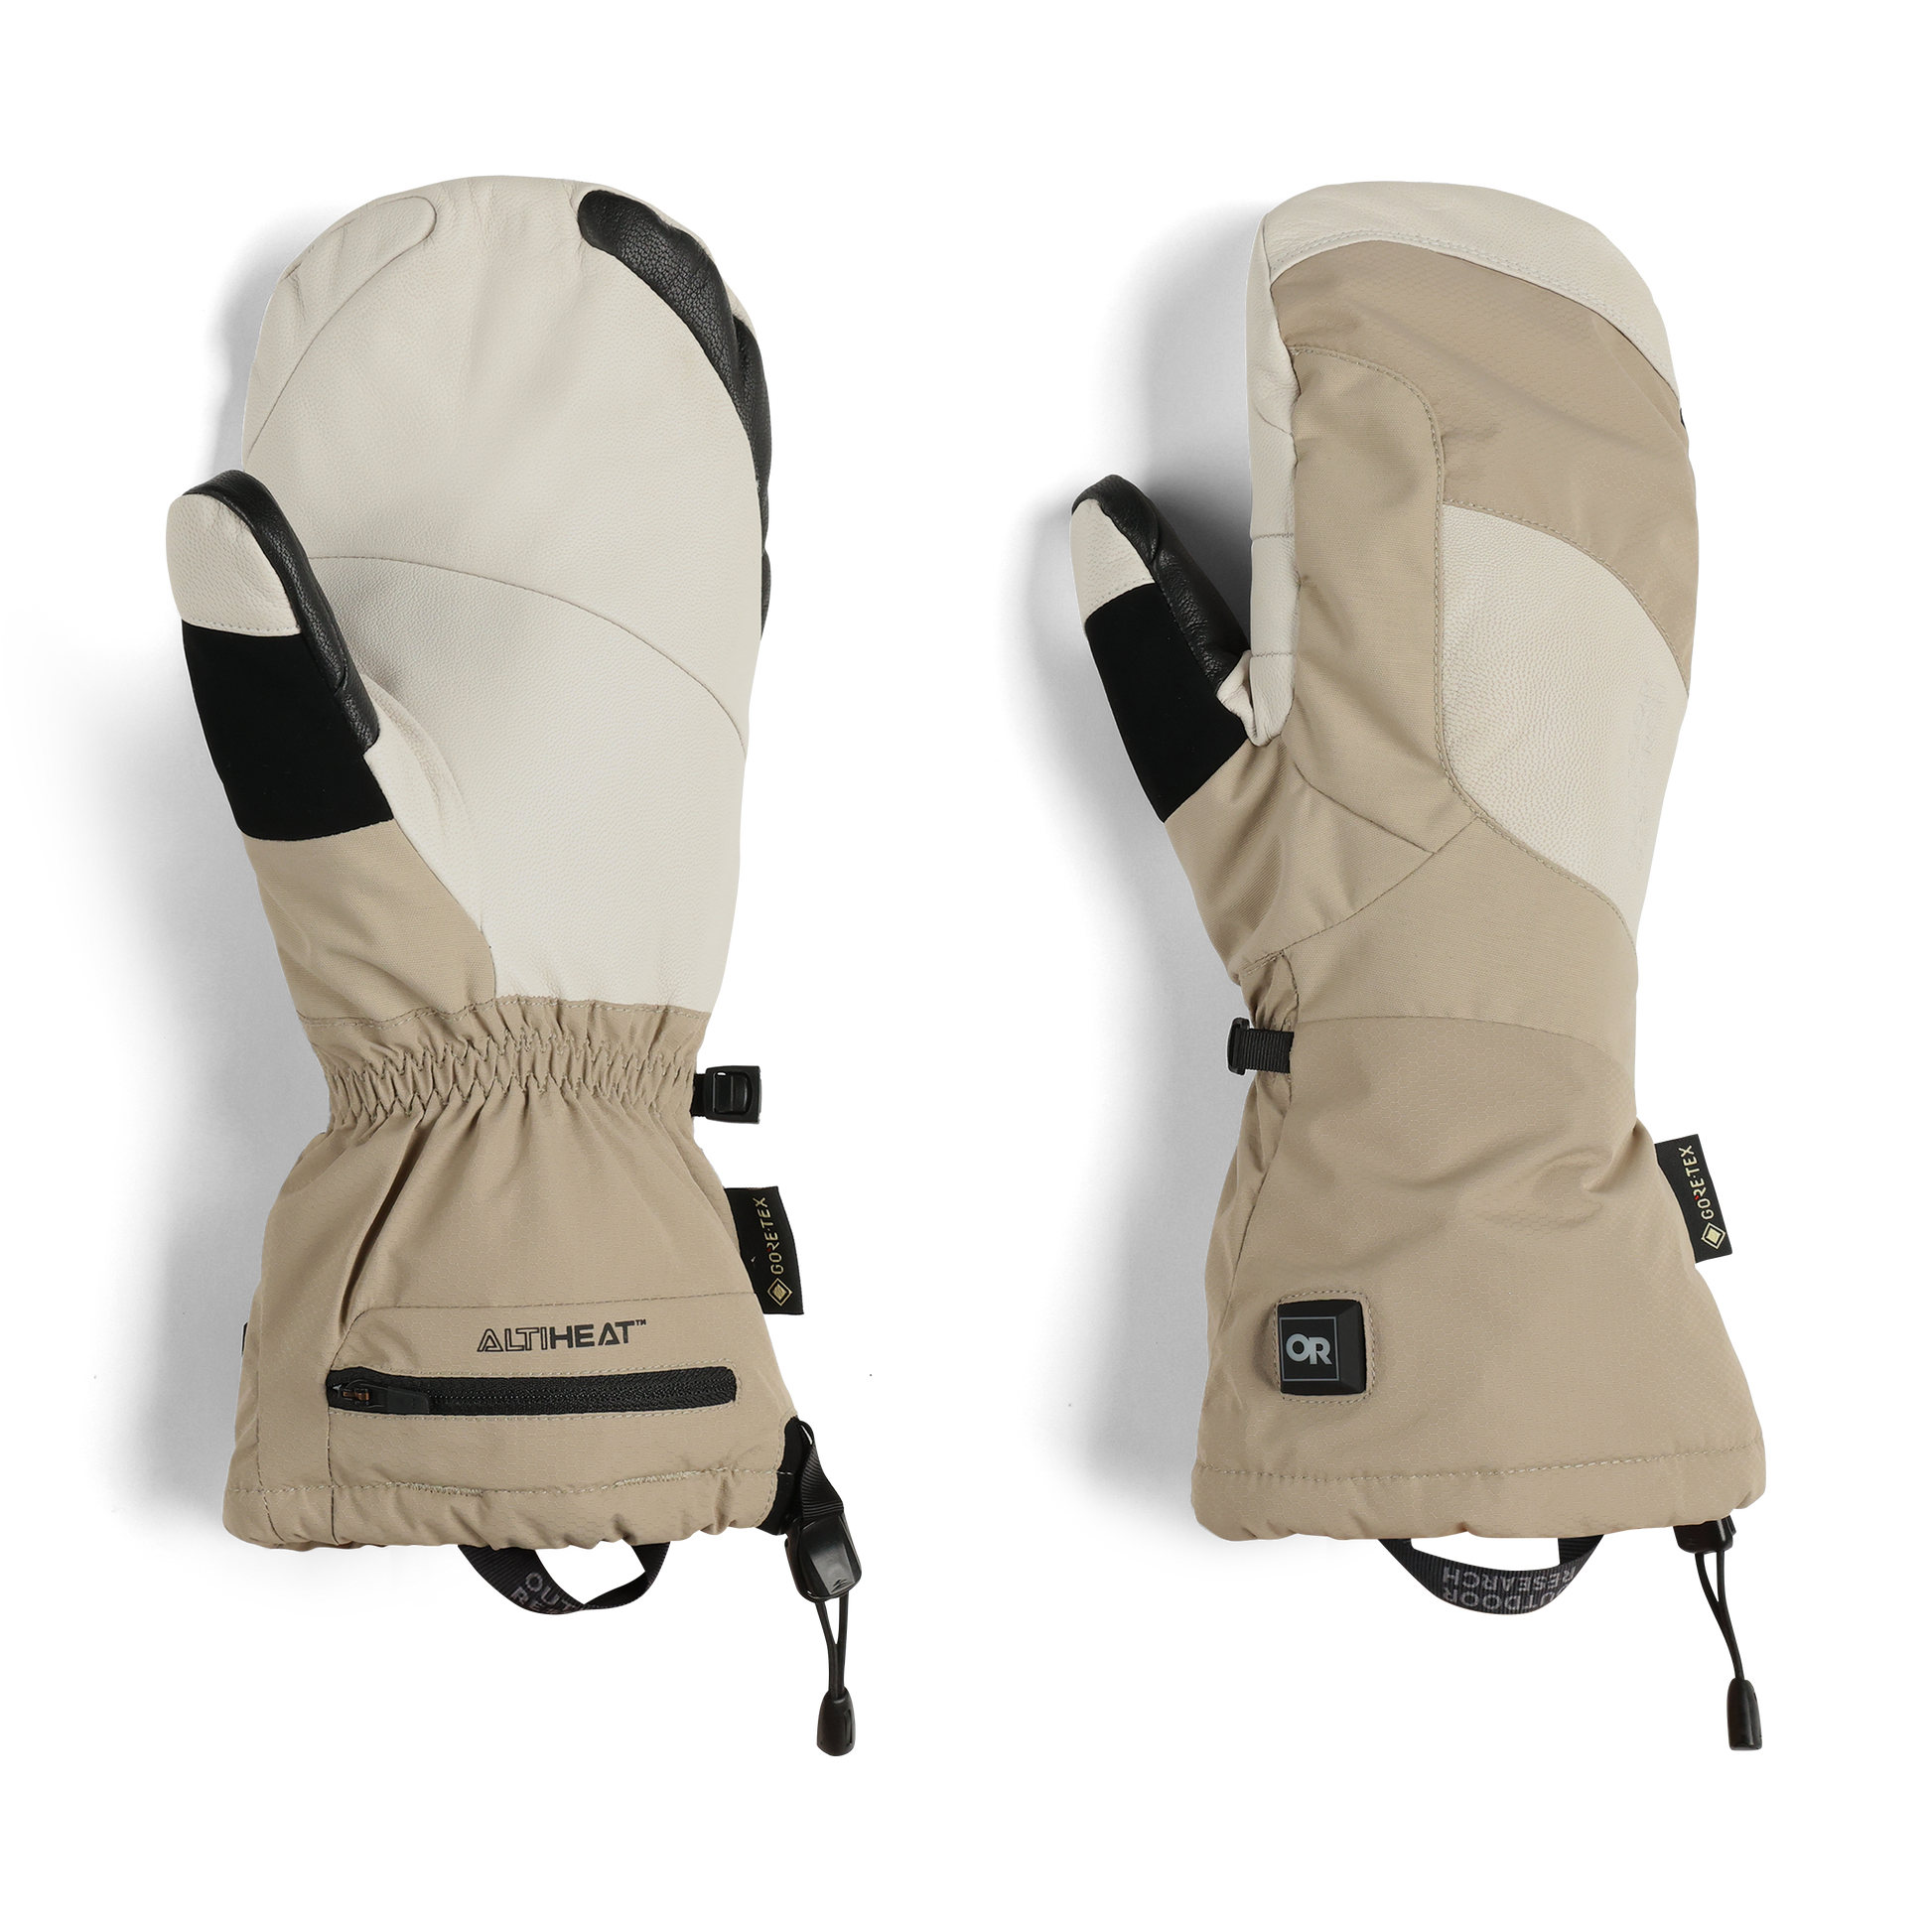 Prevail Heated GORE-TEX Mitts